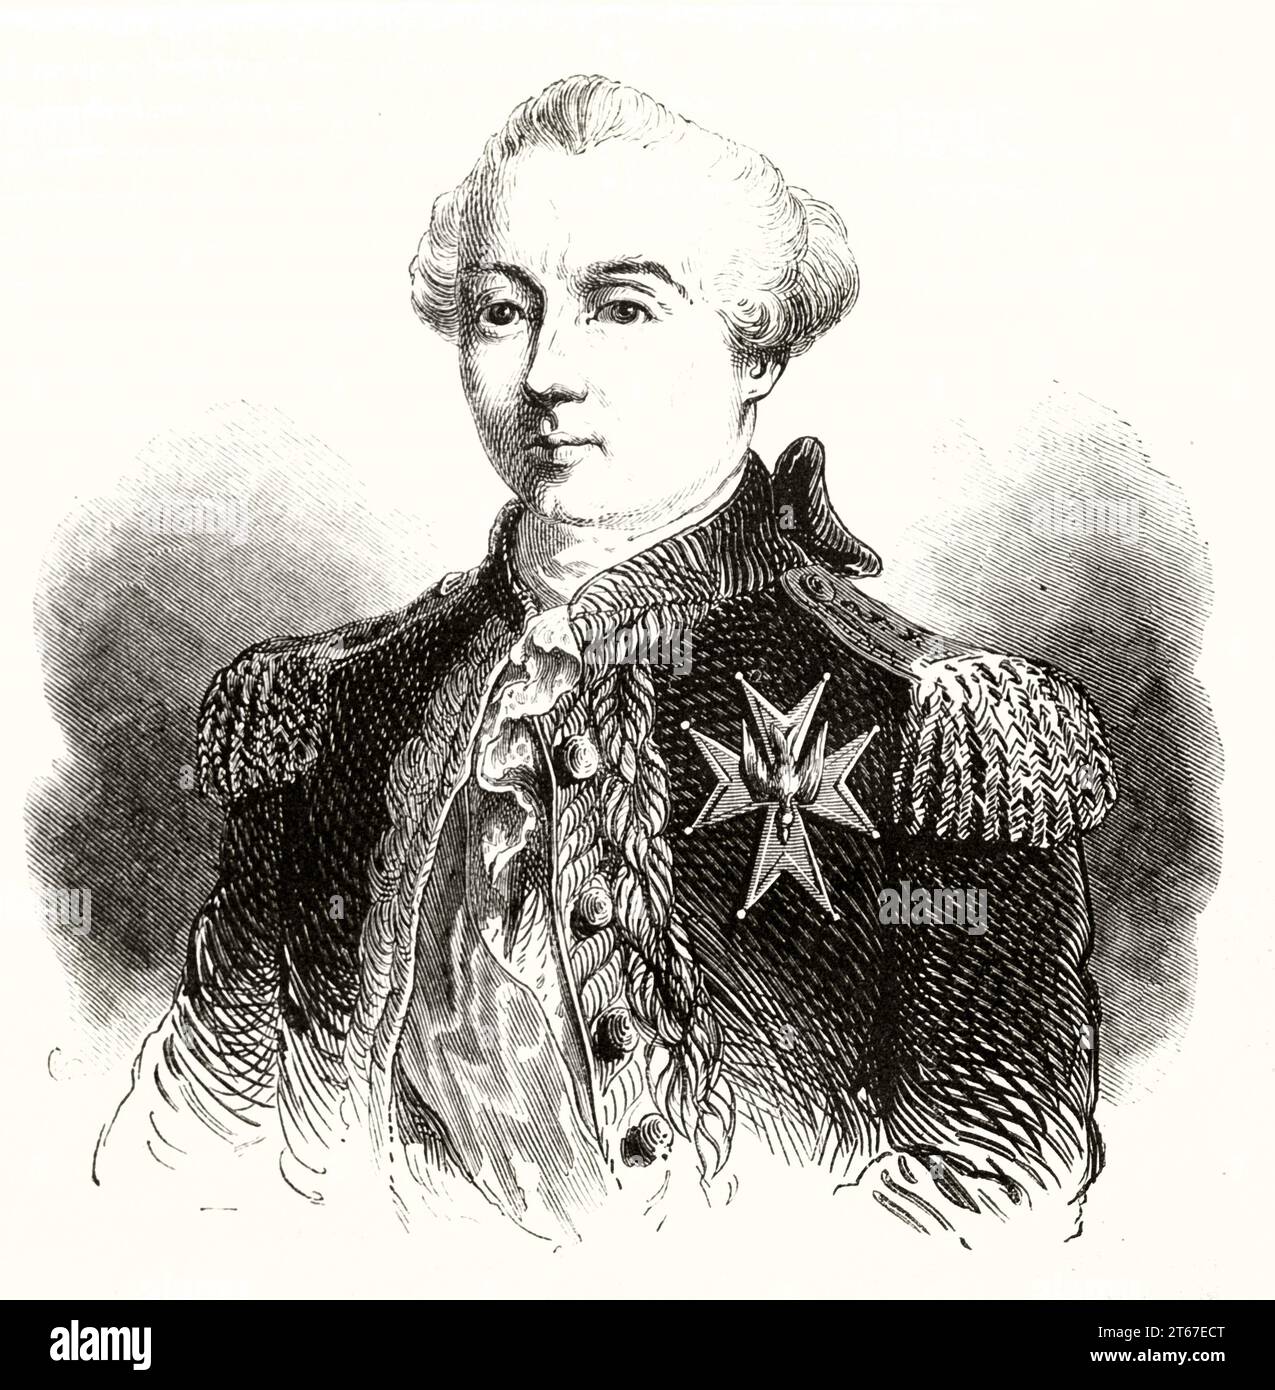 Old engraved portrait of Charles Henri Hector d'Estaing (1729 – 1794), French admiral. By  Foulquier, publ. on Magasin Pittoresque, Paris, 1851 Stock Photo